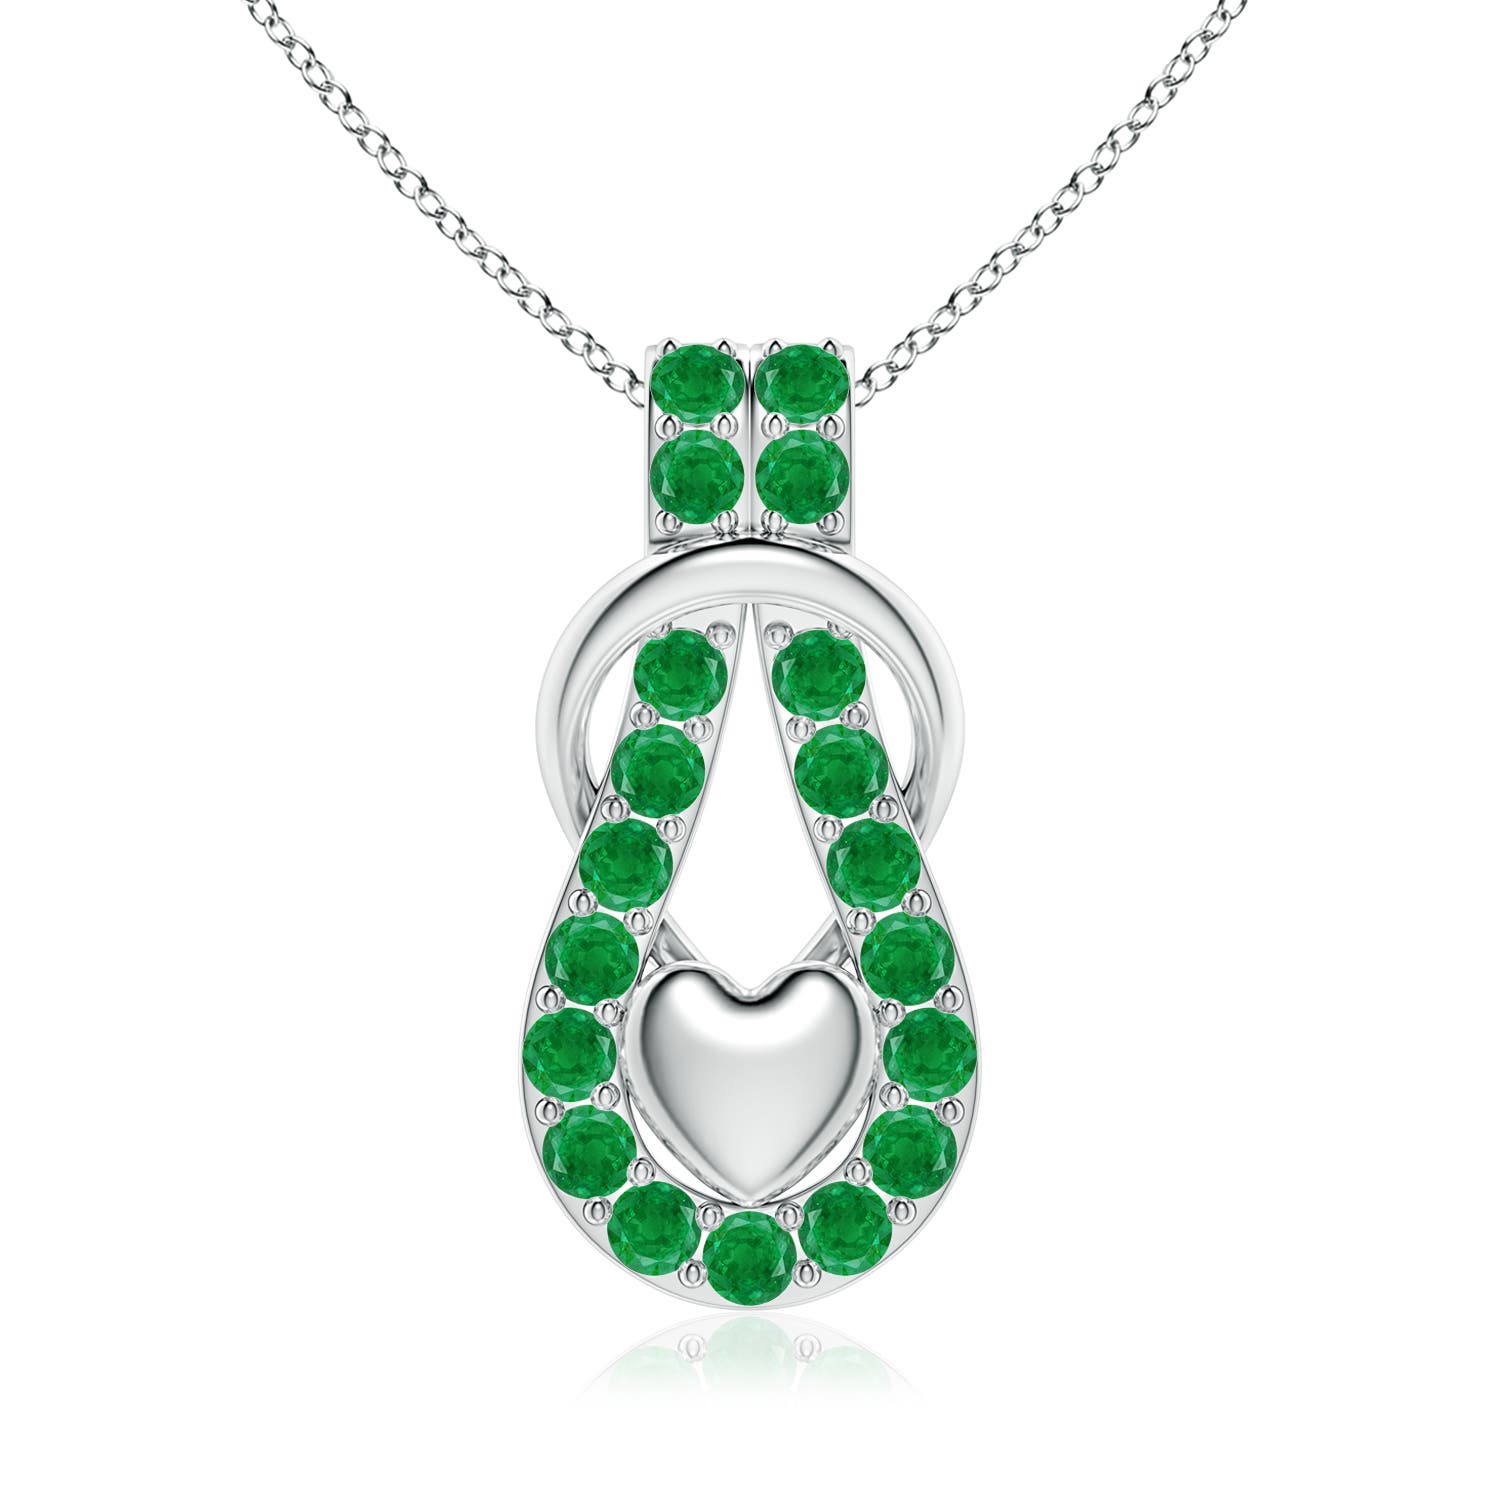 AA - Emerald / 2.85 CT / 14 KT White Gold